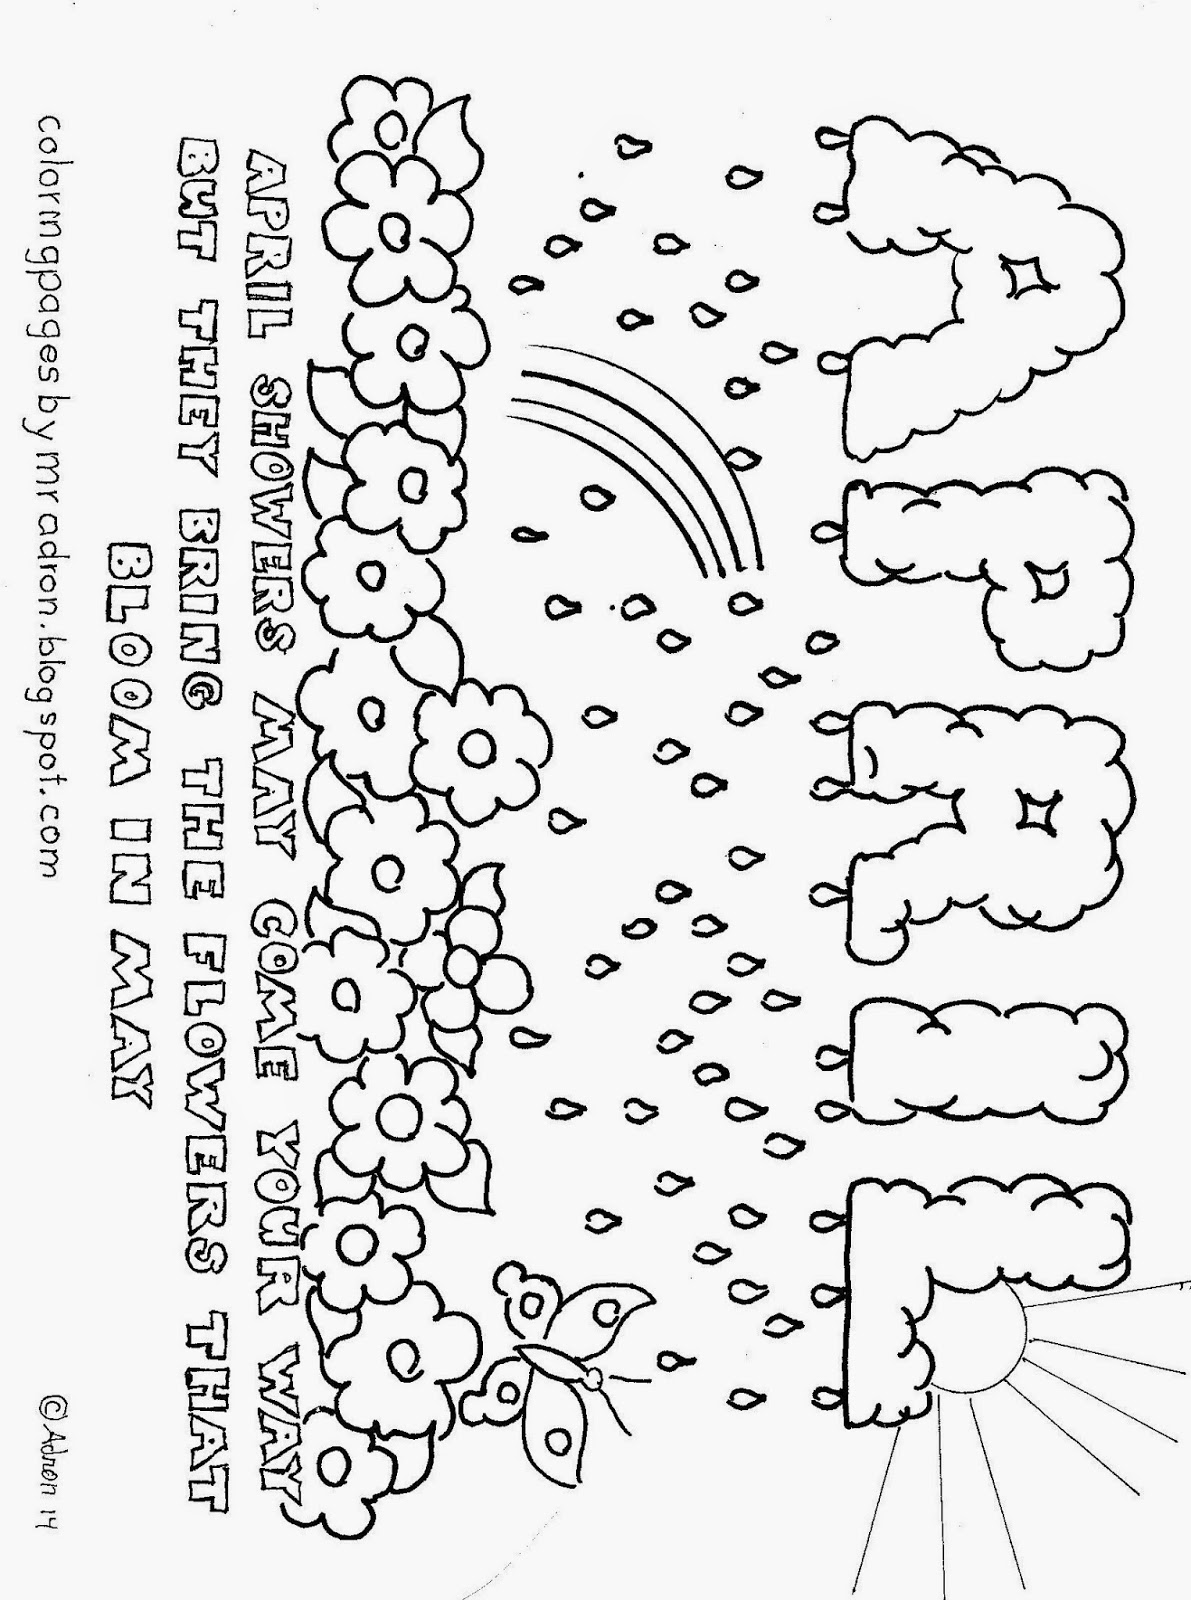 coloring-pages-for-kids-by-mr-adron-month-of-april-free-kid-s-coloring-page